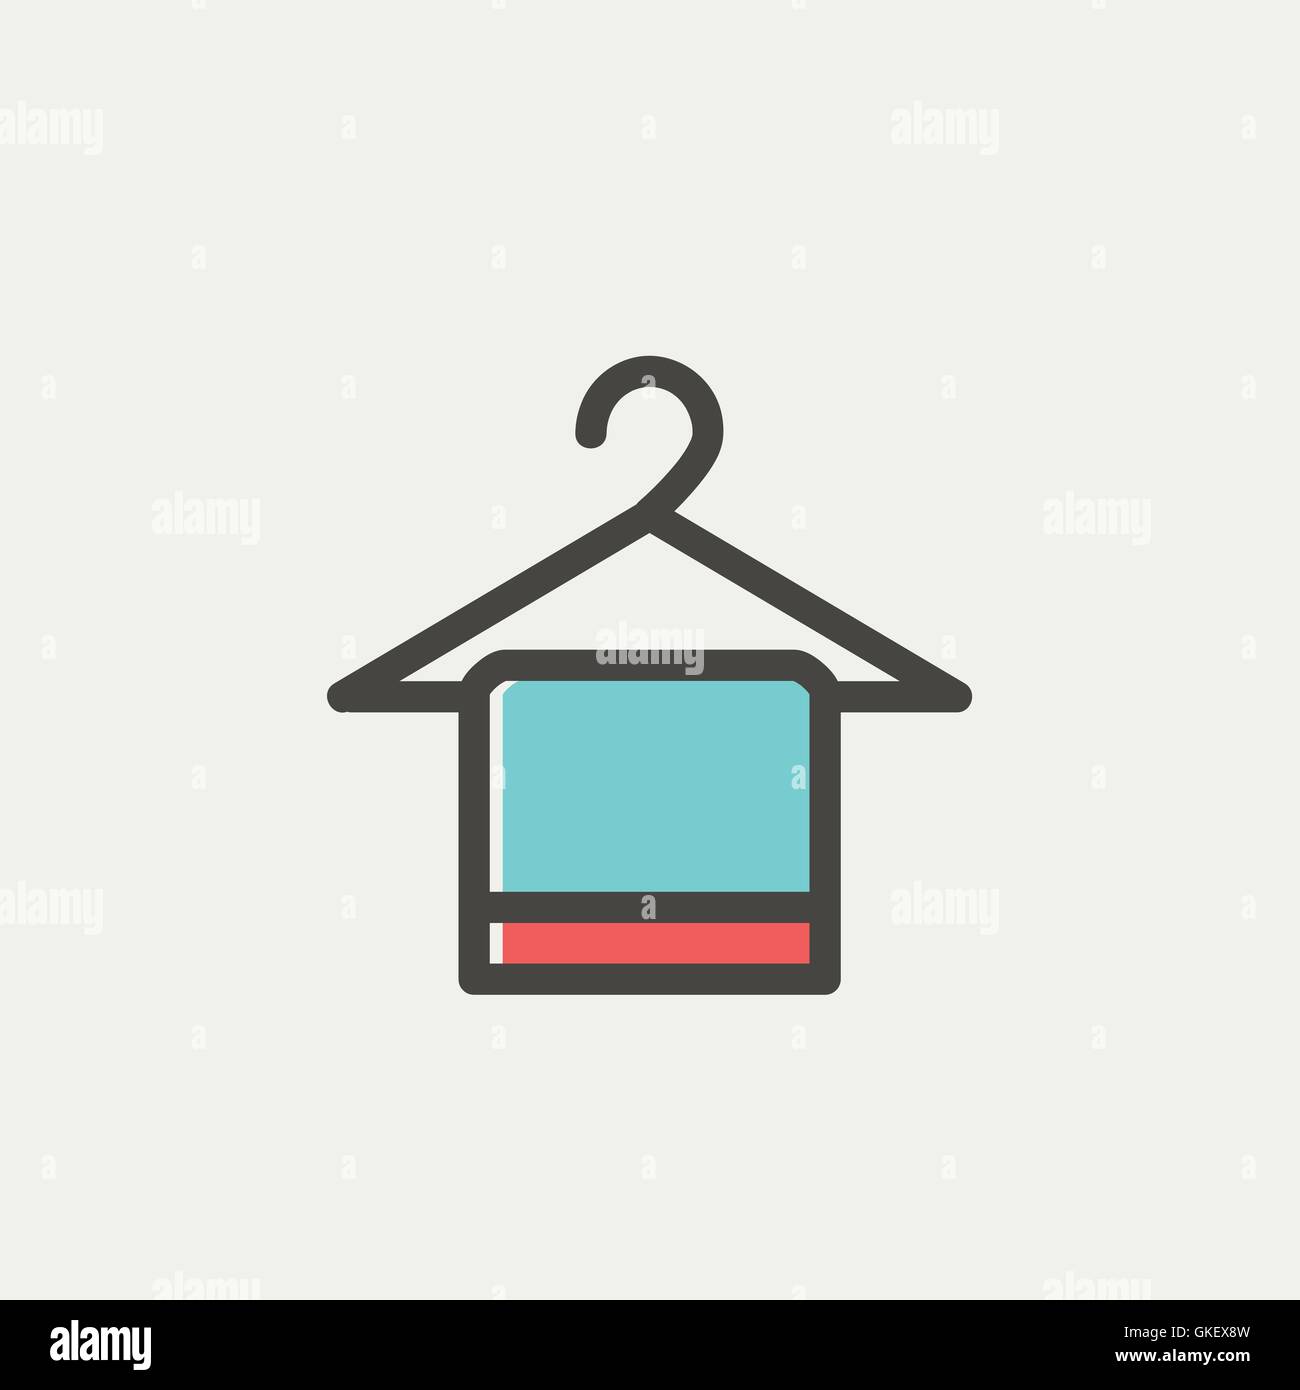 Towel on a hanger thin line icon Stock Vector